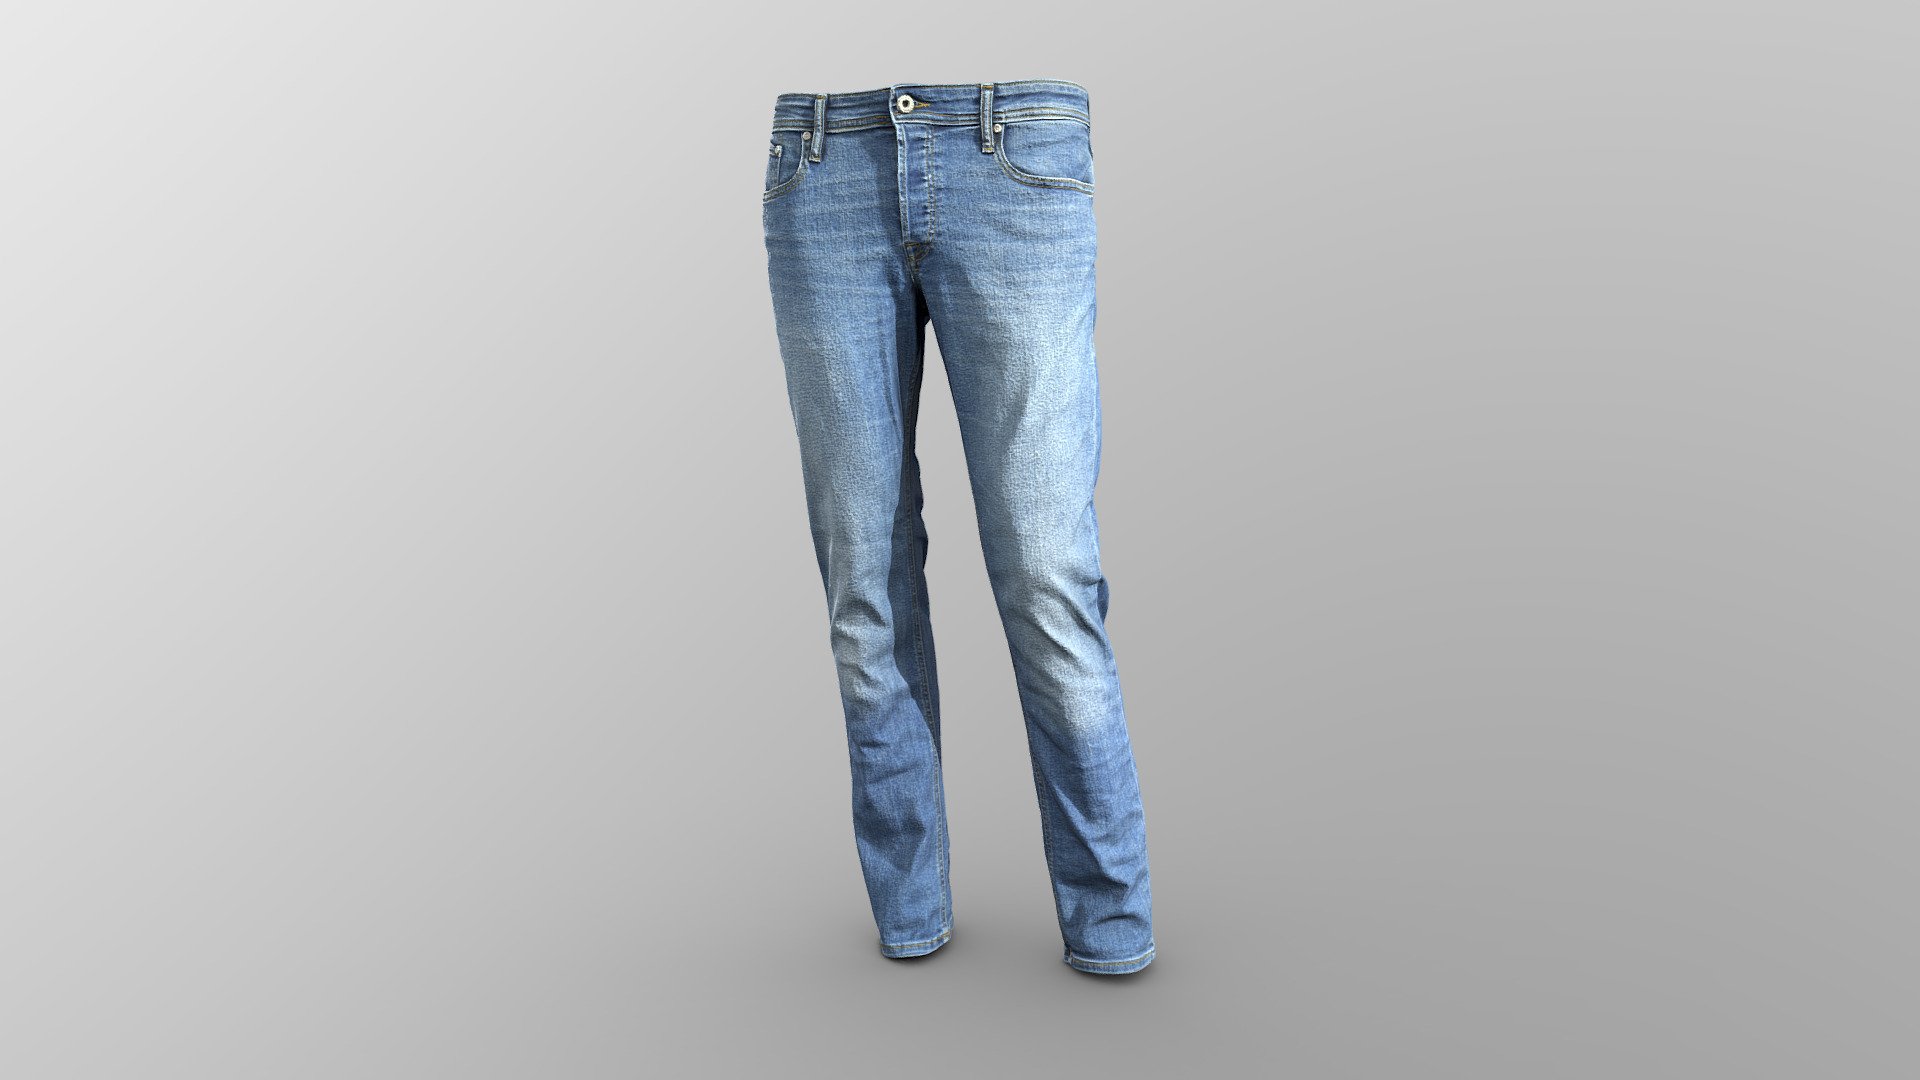 Realistic high detailed Jeans pants model with high resolution textures.
Model created by our unique semi-automatic scanning technology

Optimized for 3D web and AR / VR

=======FEATURES===========


The units of measurement during the creation process were milimeters.
Clean and optimized topology is used for maximum polygon efficiency.
This model consists of 1 meshes.
All objects have fully unwrapped UVs.
The model has 2 materials
Includes high detailed normal map

Includes High detail 4096x4096 .png textures (diffuse (base color), Roughness, Metallness, Normal)


50k polygons - Jack Jones JJIGLENN JJORIGINAL - Slim Fit Jeans - Buy Royalty Free 3D model by VRModelFactory 3d model